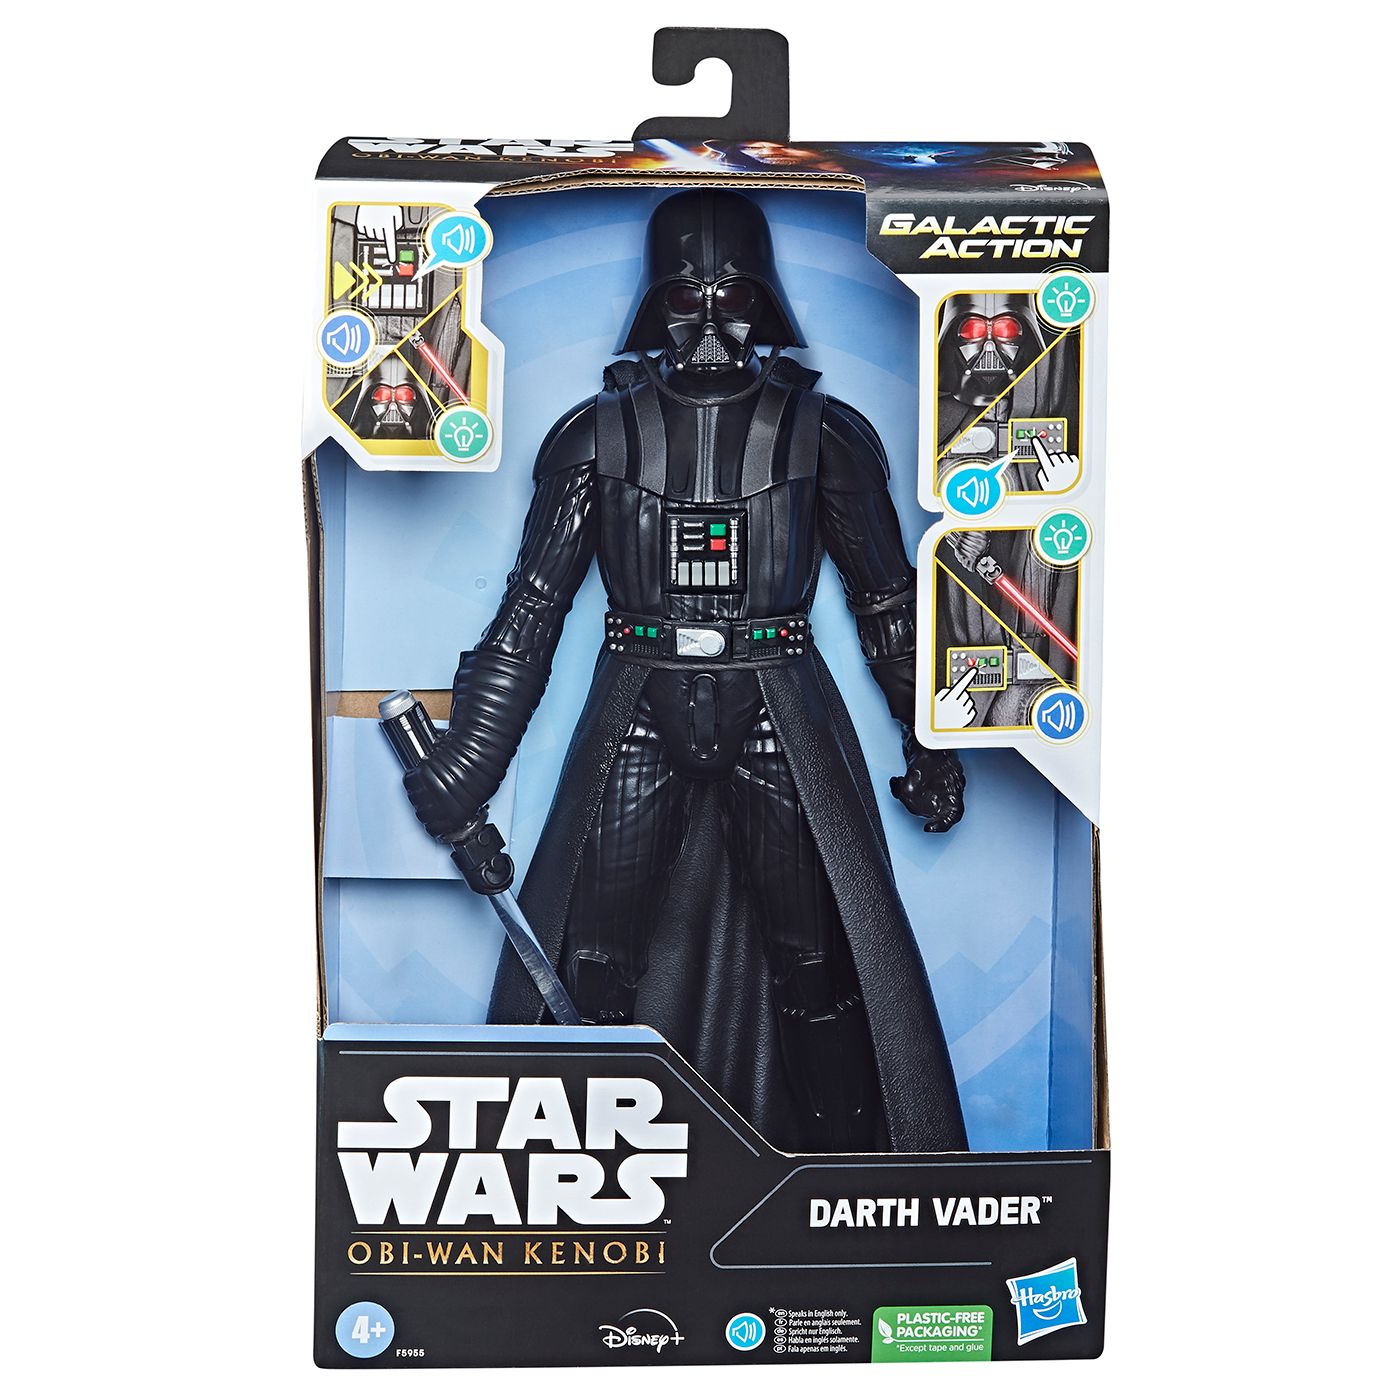 STAR-WARS-GALACTIC-ACTION-DARTH-VADER-INTERACTIVE-ELECTRONIC-FIGURE-4-copy-2